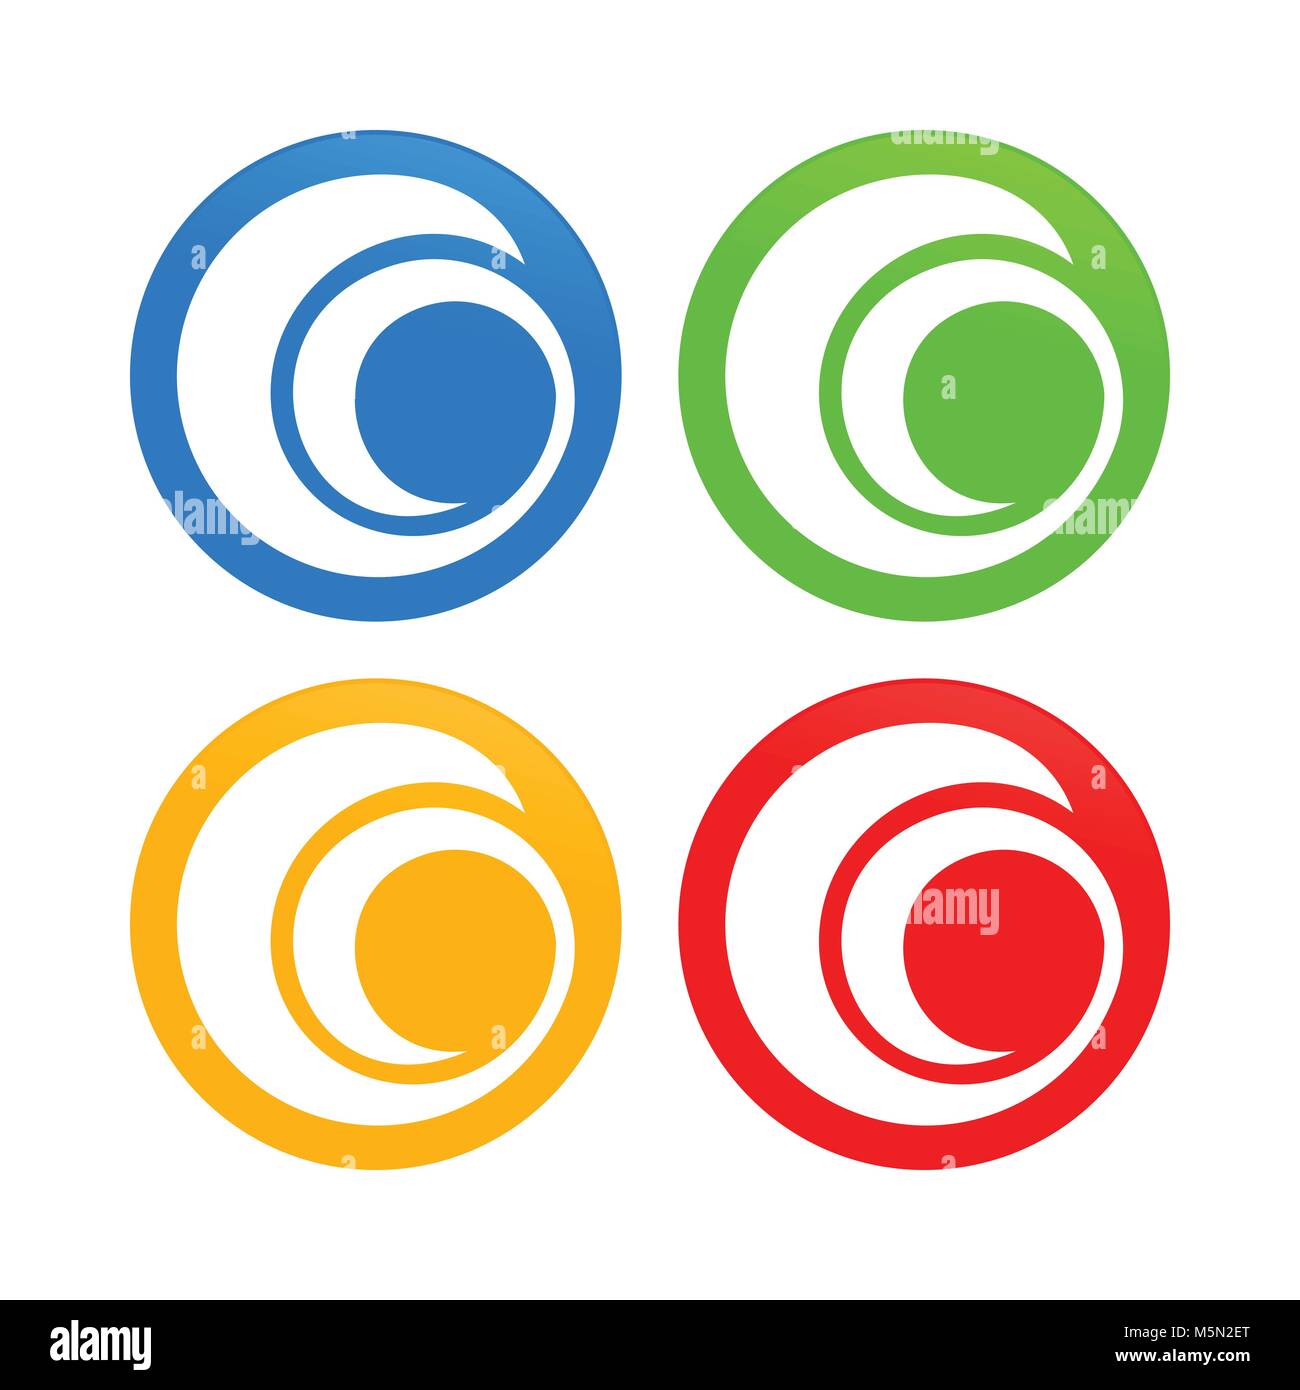 Abstract Spiral Initial G Round Icons Vector Graphic Design Stock Vector